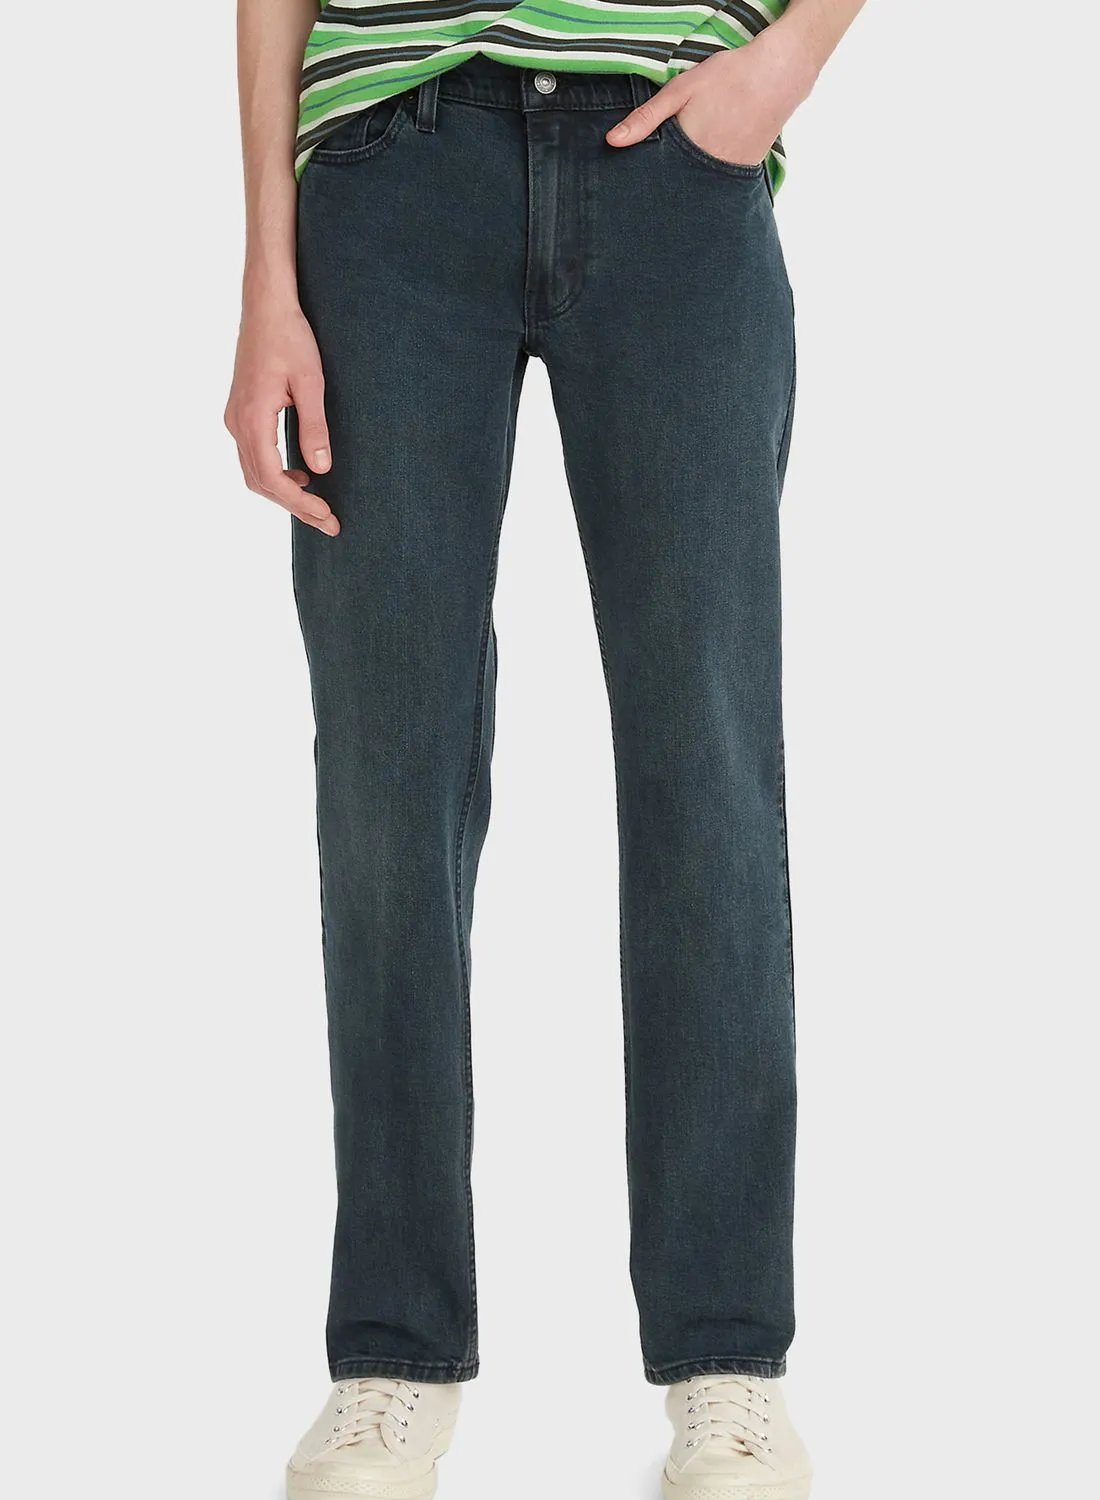 Levi's Rinse Wash Straight Fit Jeans